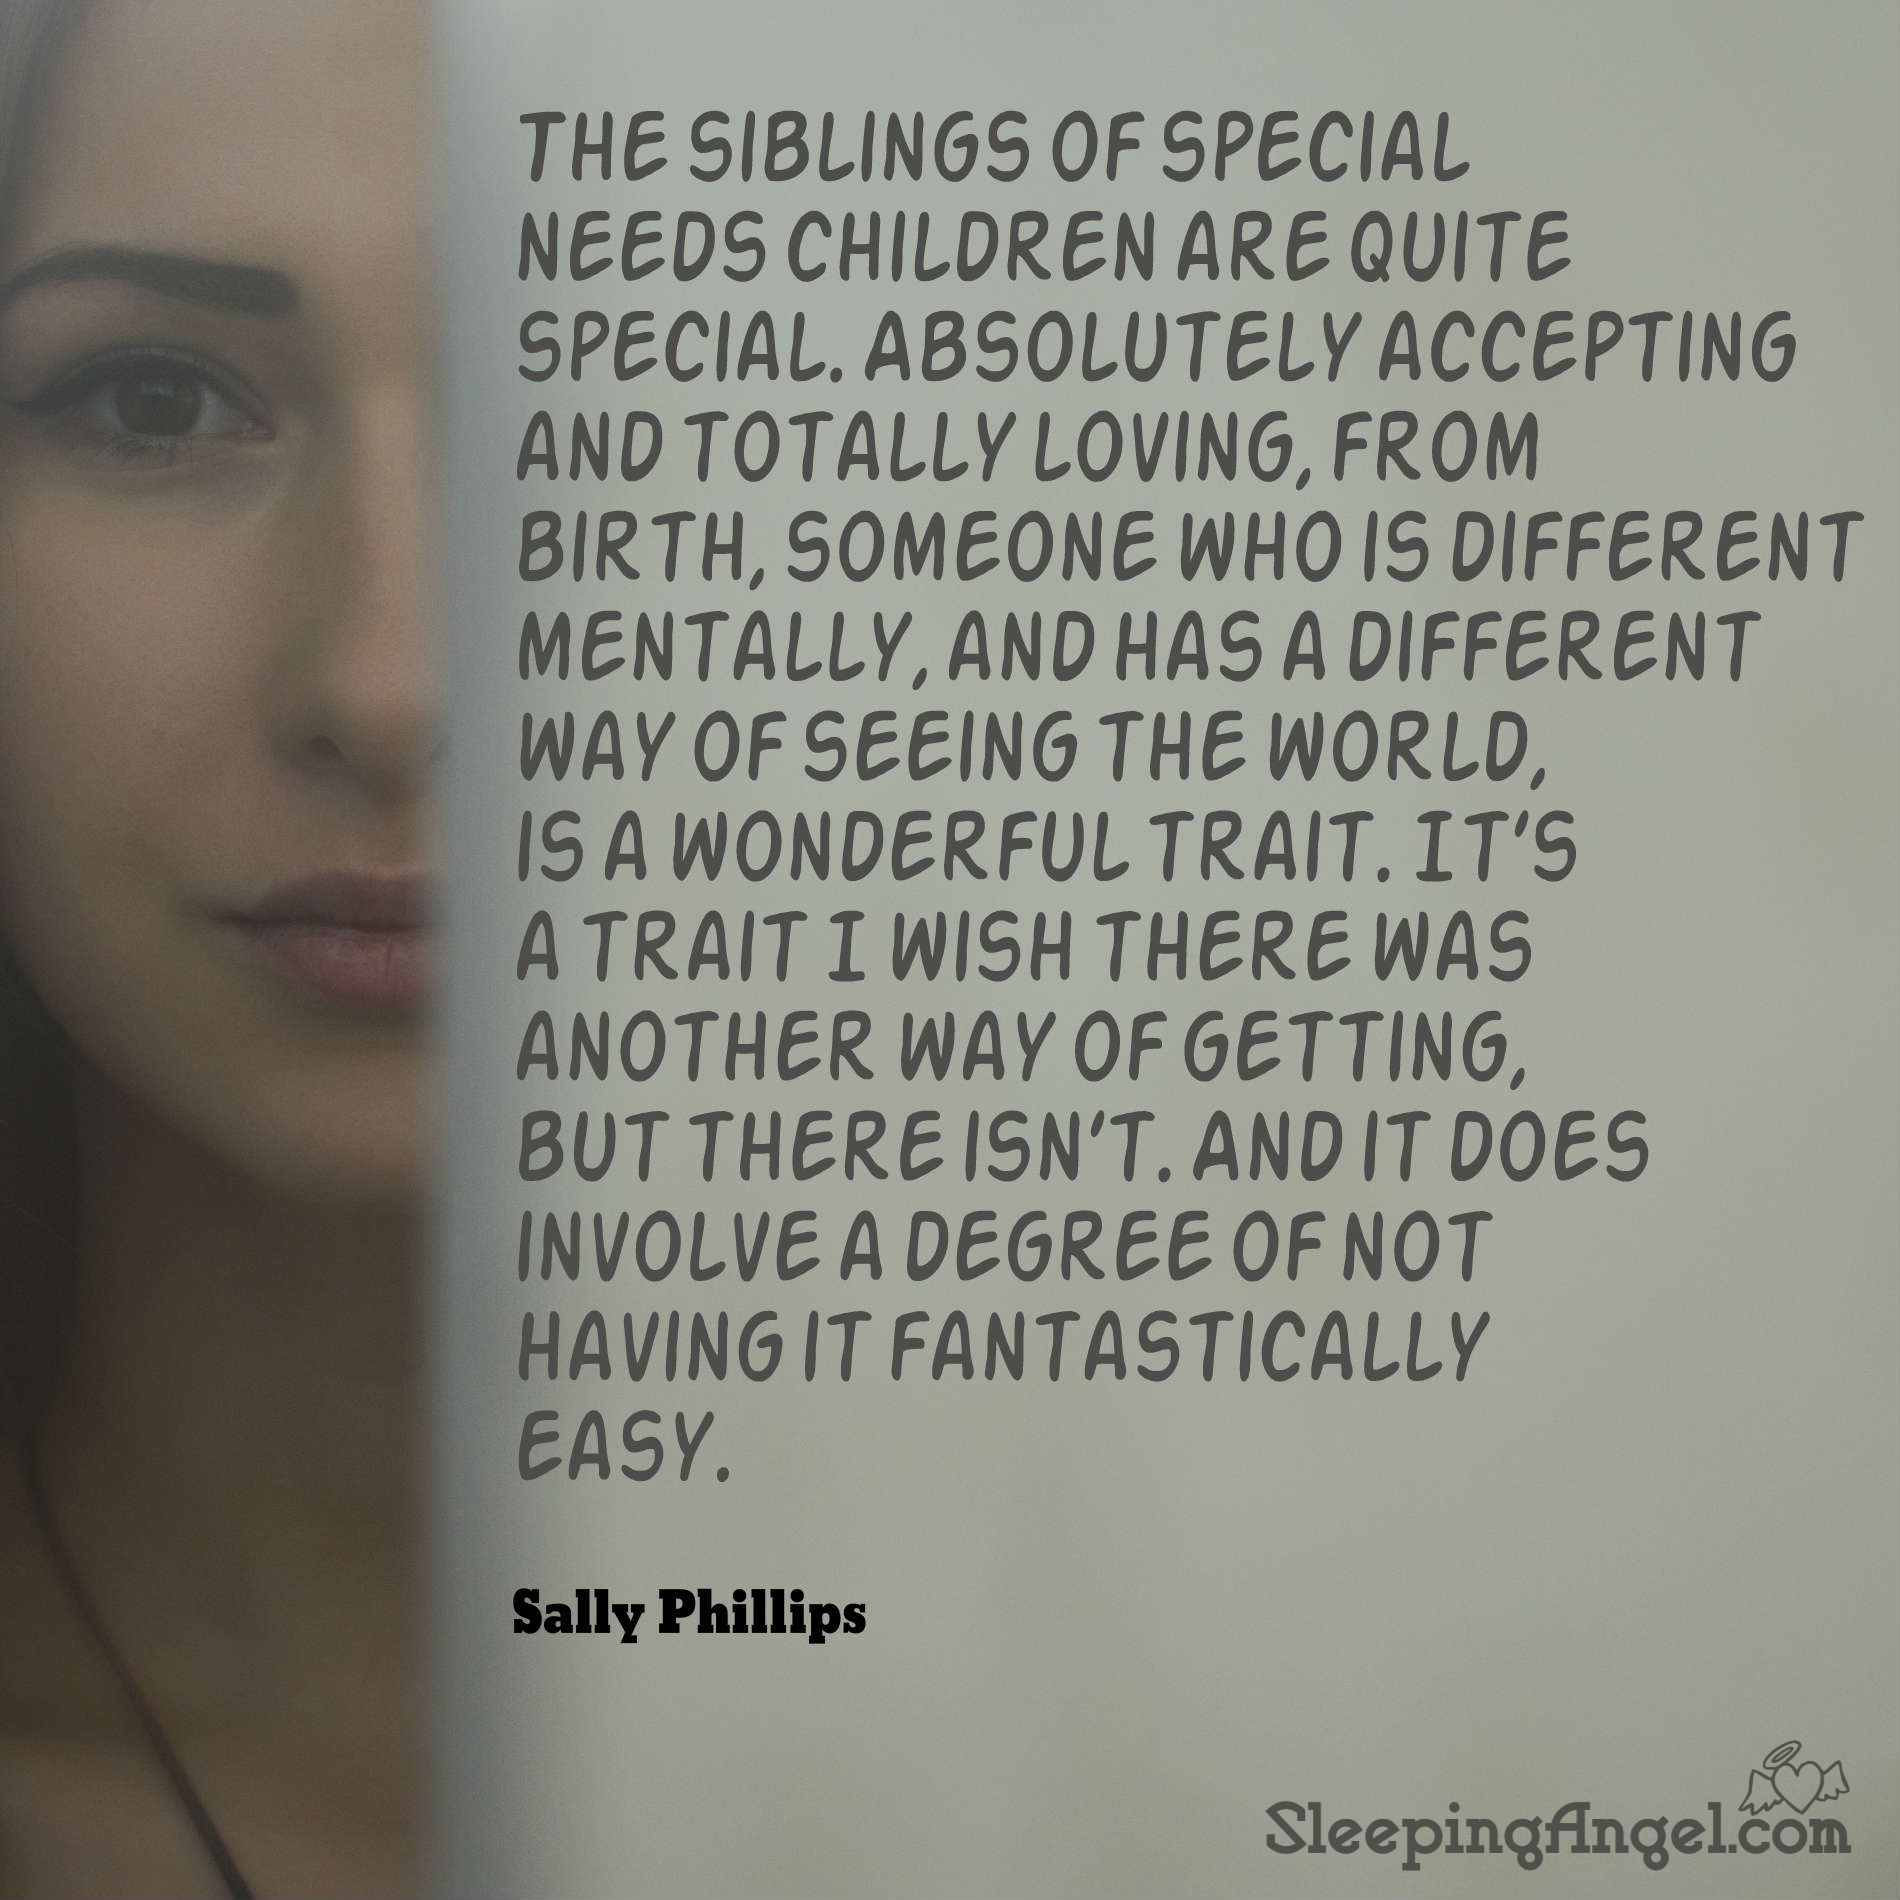 Siblings of Special Needs Children Quote